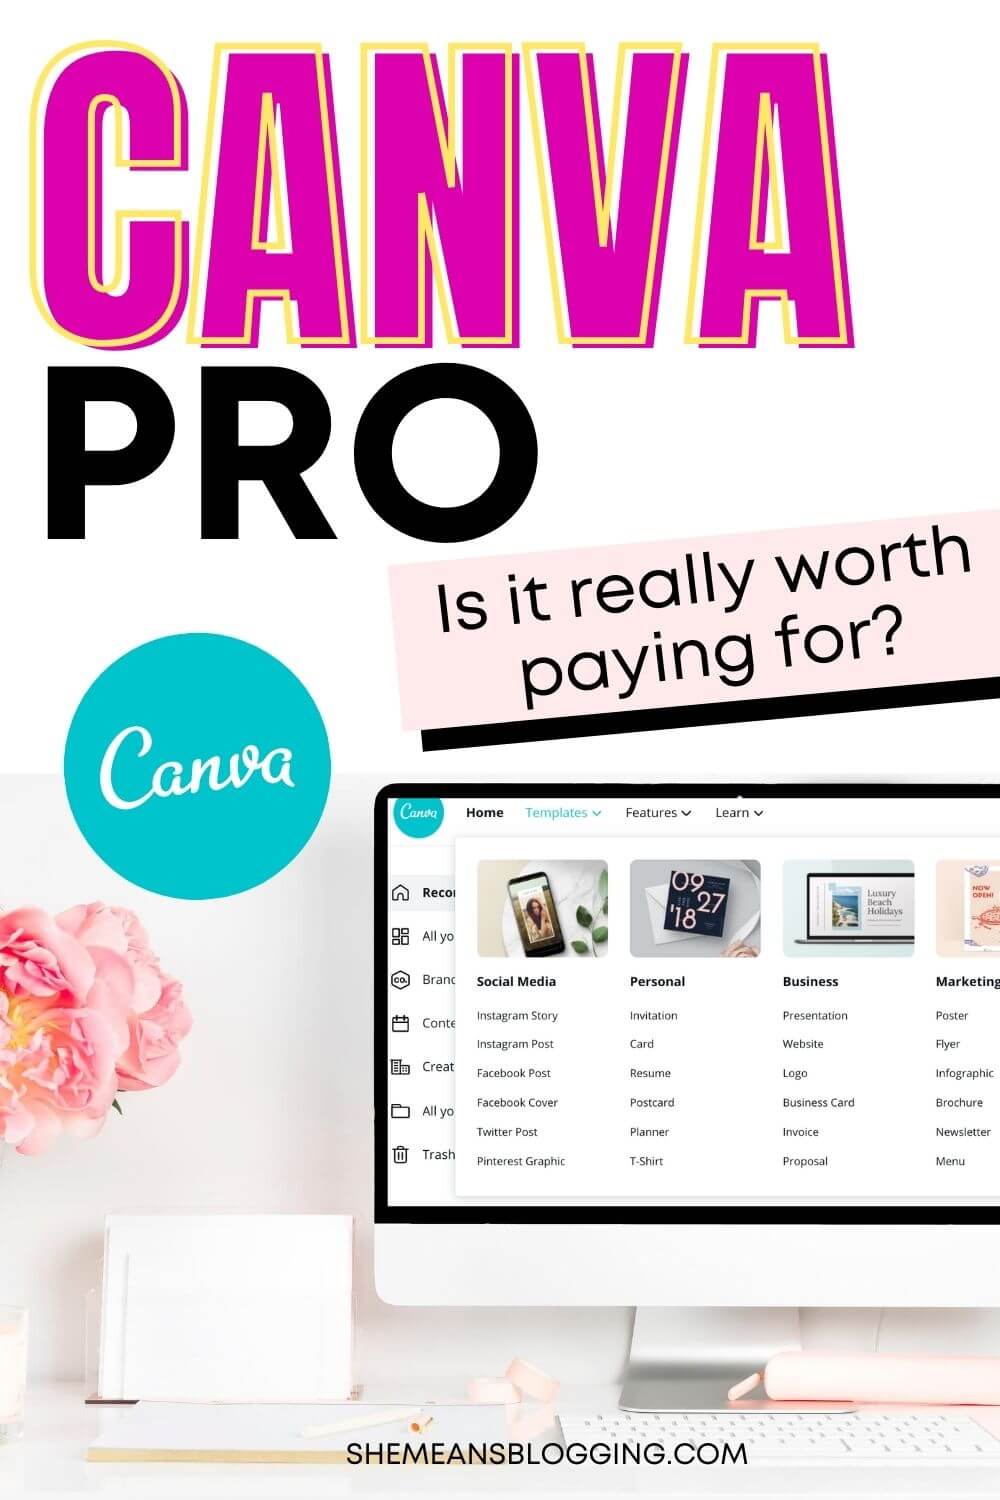 Is it really worth paying for Canva PRO? Let me share with you power features of using Canva pro and how extremely I have found canva pro useful for my business. Even my graphics got better with canva pro! #canvatips #bloggingtips #bloggingforbeginners #graphic